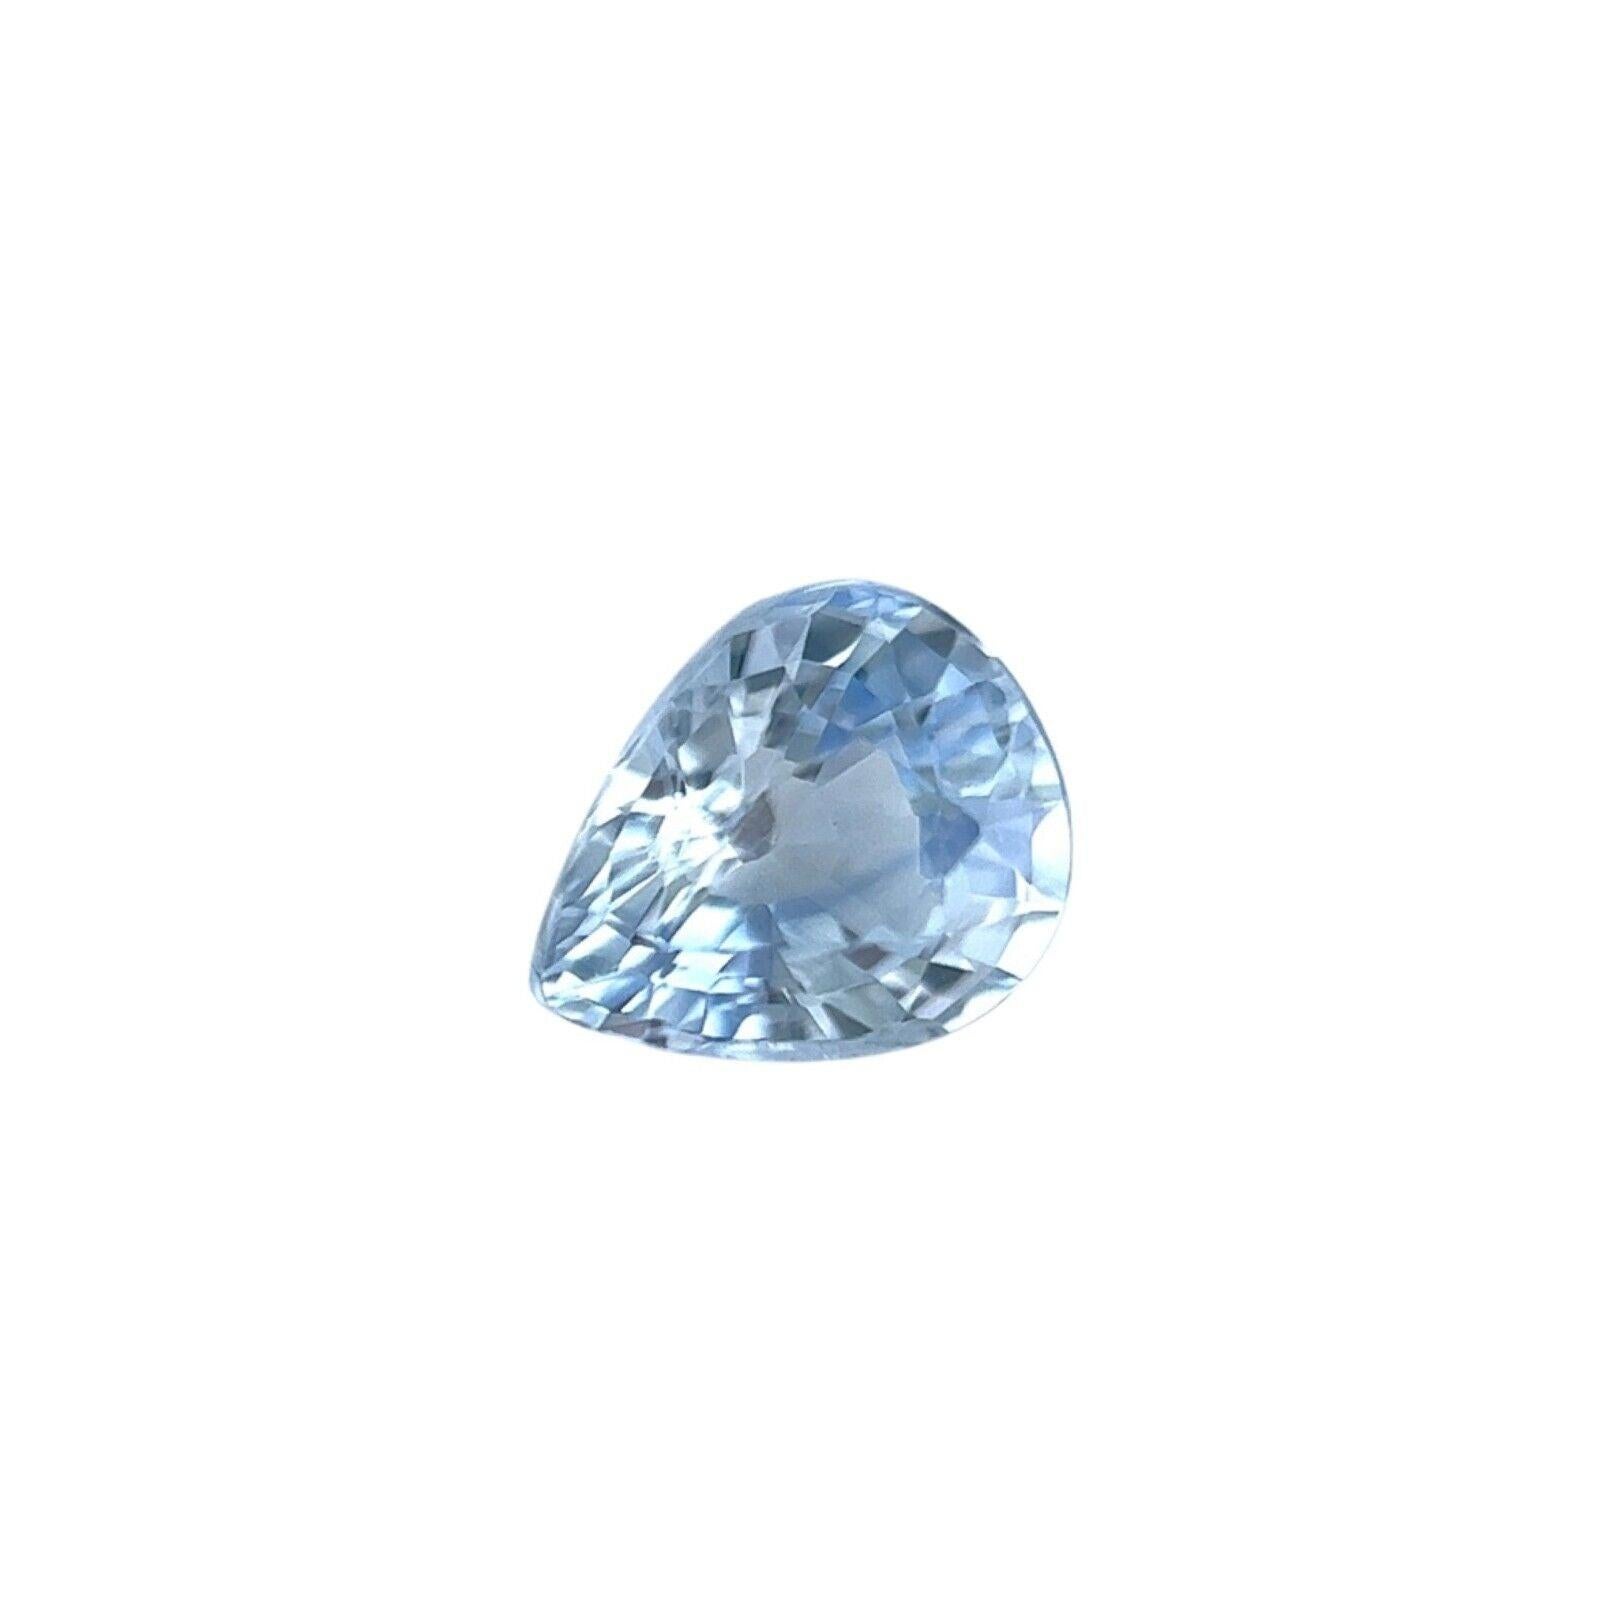 Natural 1.14ct Light Blue Ceylon Fine Sapphire Pear Cut 7x5.7mm Loose Gem VS

Natural Ceylon Light Blue Sapphire.
1.14 Carat with a beautiful light blue colour and an excellent pear cut and ideal polish to show great shine and colour, would look